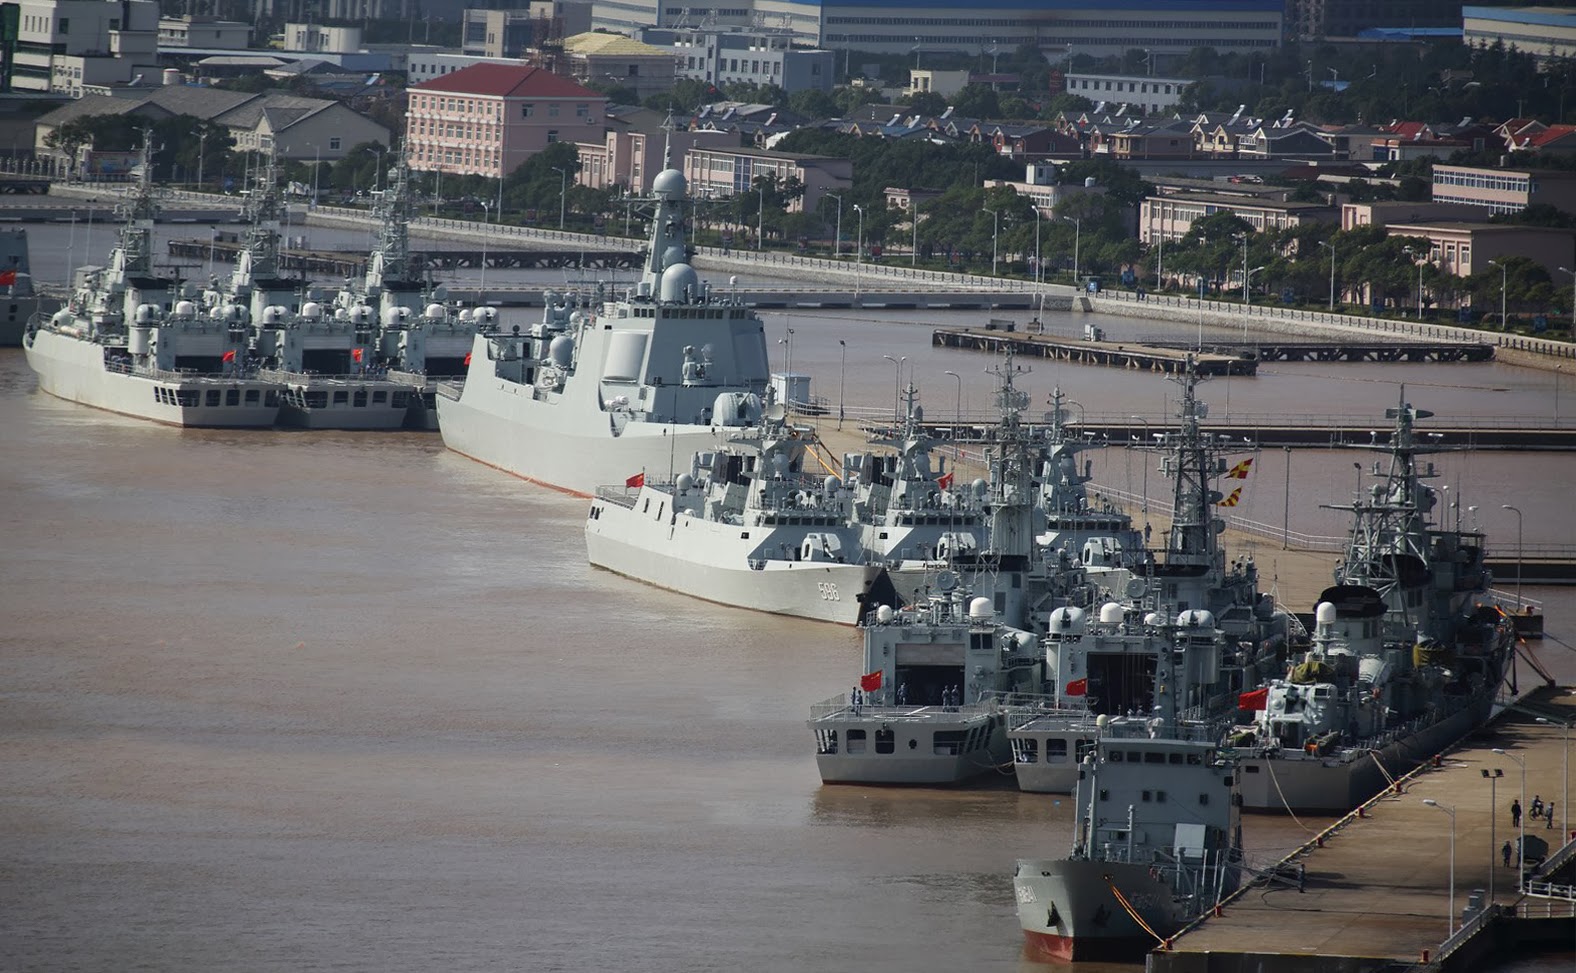 Warships+At+Chinese+Zhoushan+Naval+Base+type+054+ab+c+d+e+f+type+052+55+56+pla+navy+export+frigate+destroyer+missile+Type+052C+Guided+Missile+Destroyers%252C+Type+054A+Jiangkai+II+Guided+Missile+Frigates+and+Type+056+Guided+Corve+%25283%2529.jpg